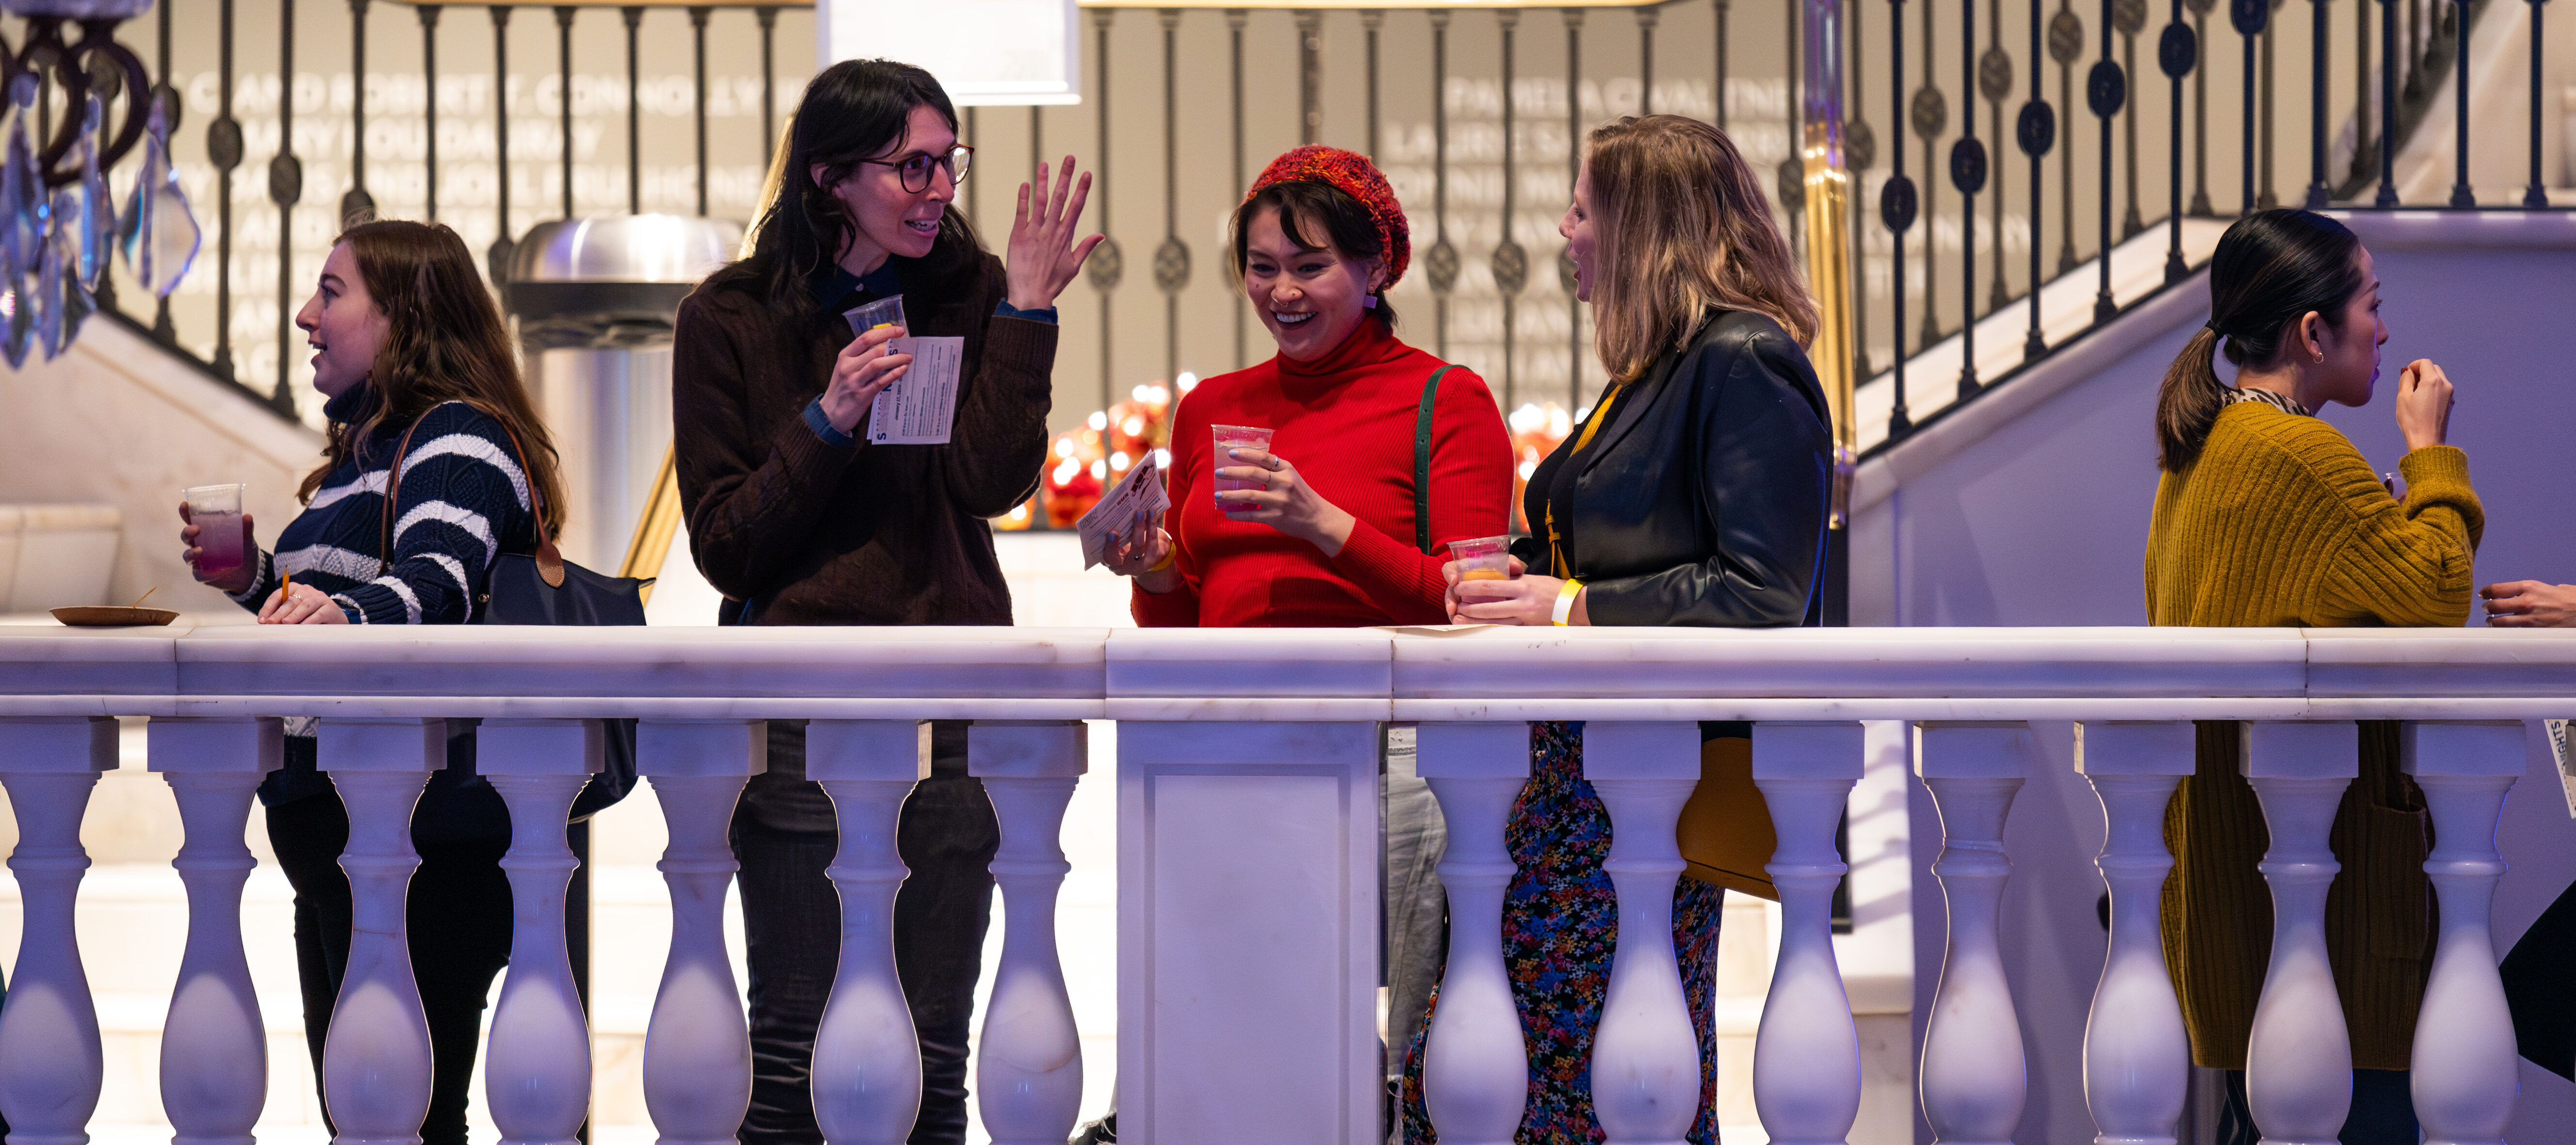 Five women talking and drinking beverages on a balcony in a museum.